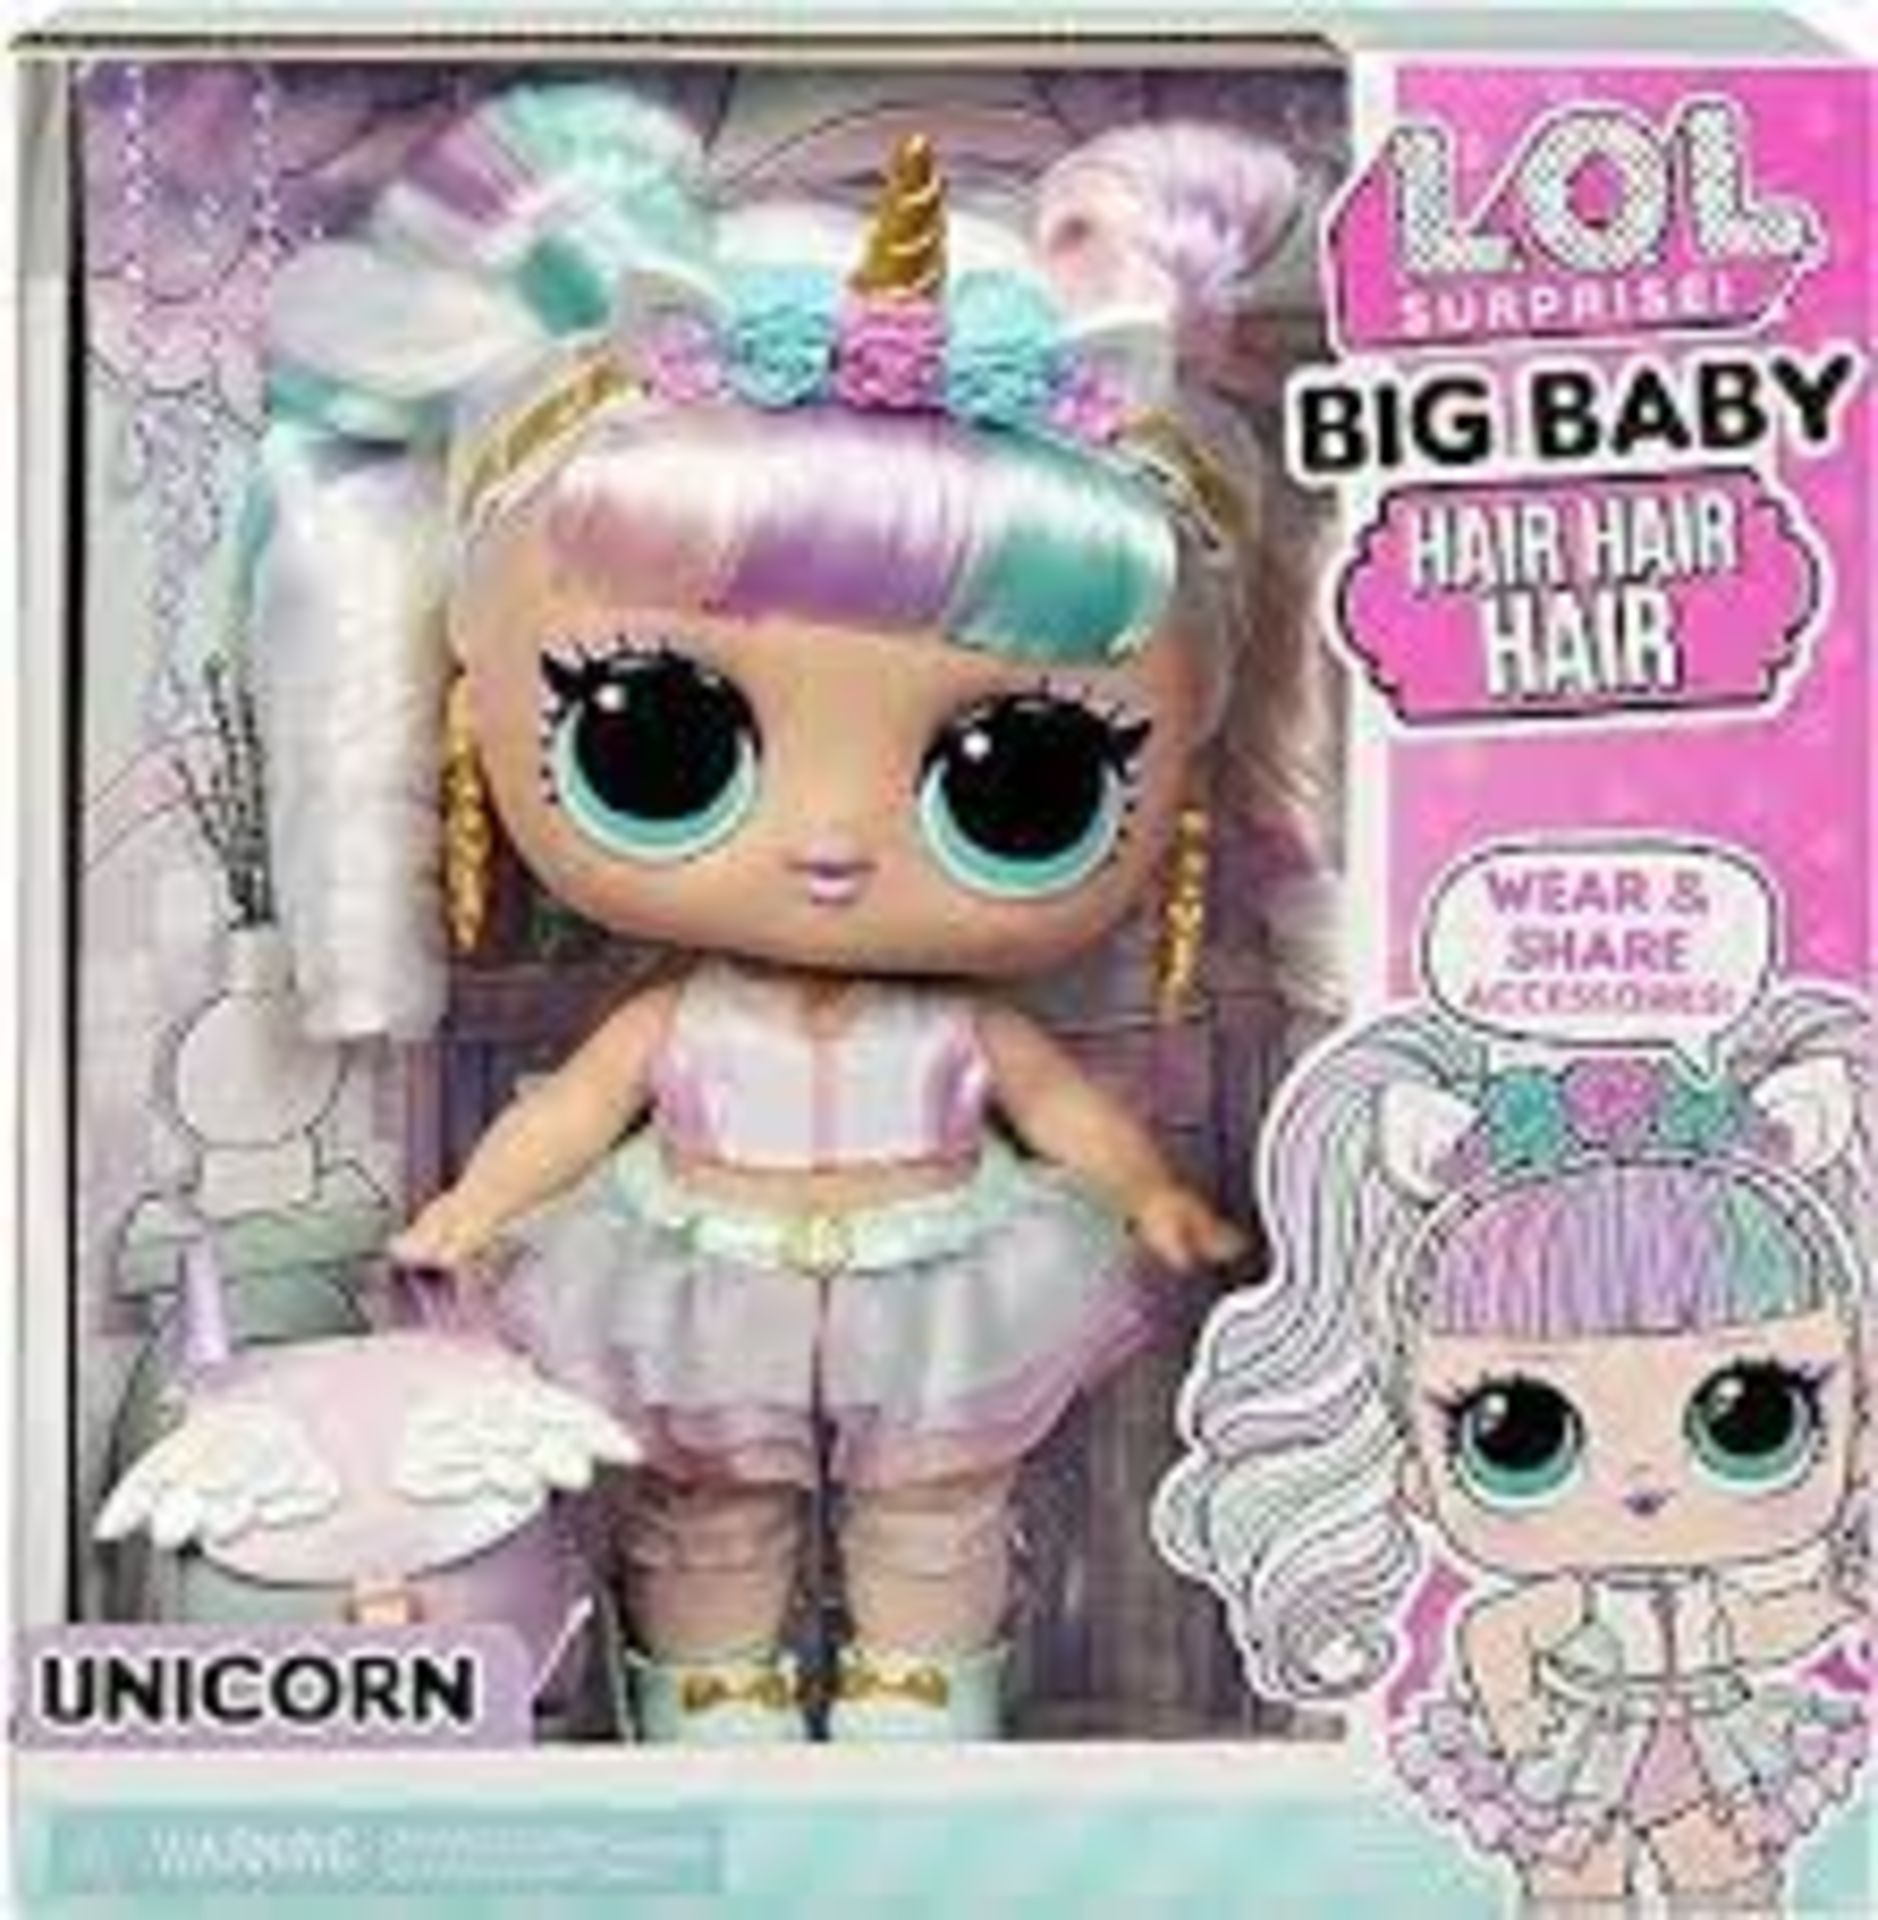 630 X BRAND NEW PIECES OF BRANDED TOYS INCLUDING LOL SURPRISE DOLL SERIES, DESIGN A FRIEND SLEEPOVER - Image 13 of 17